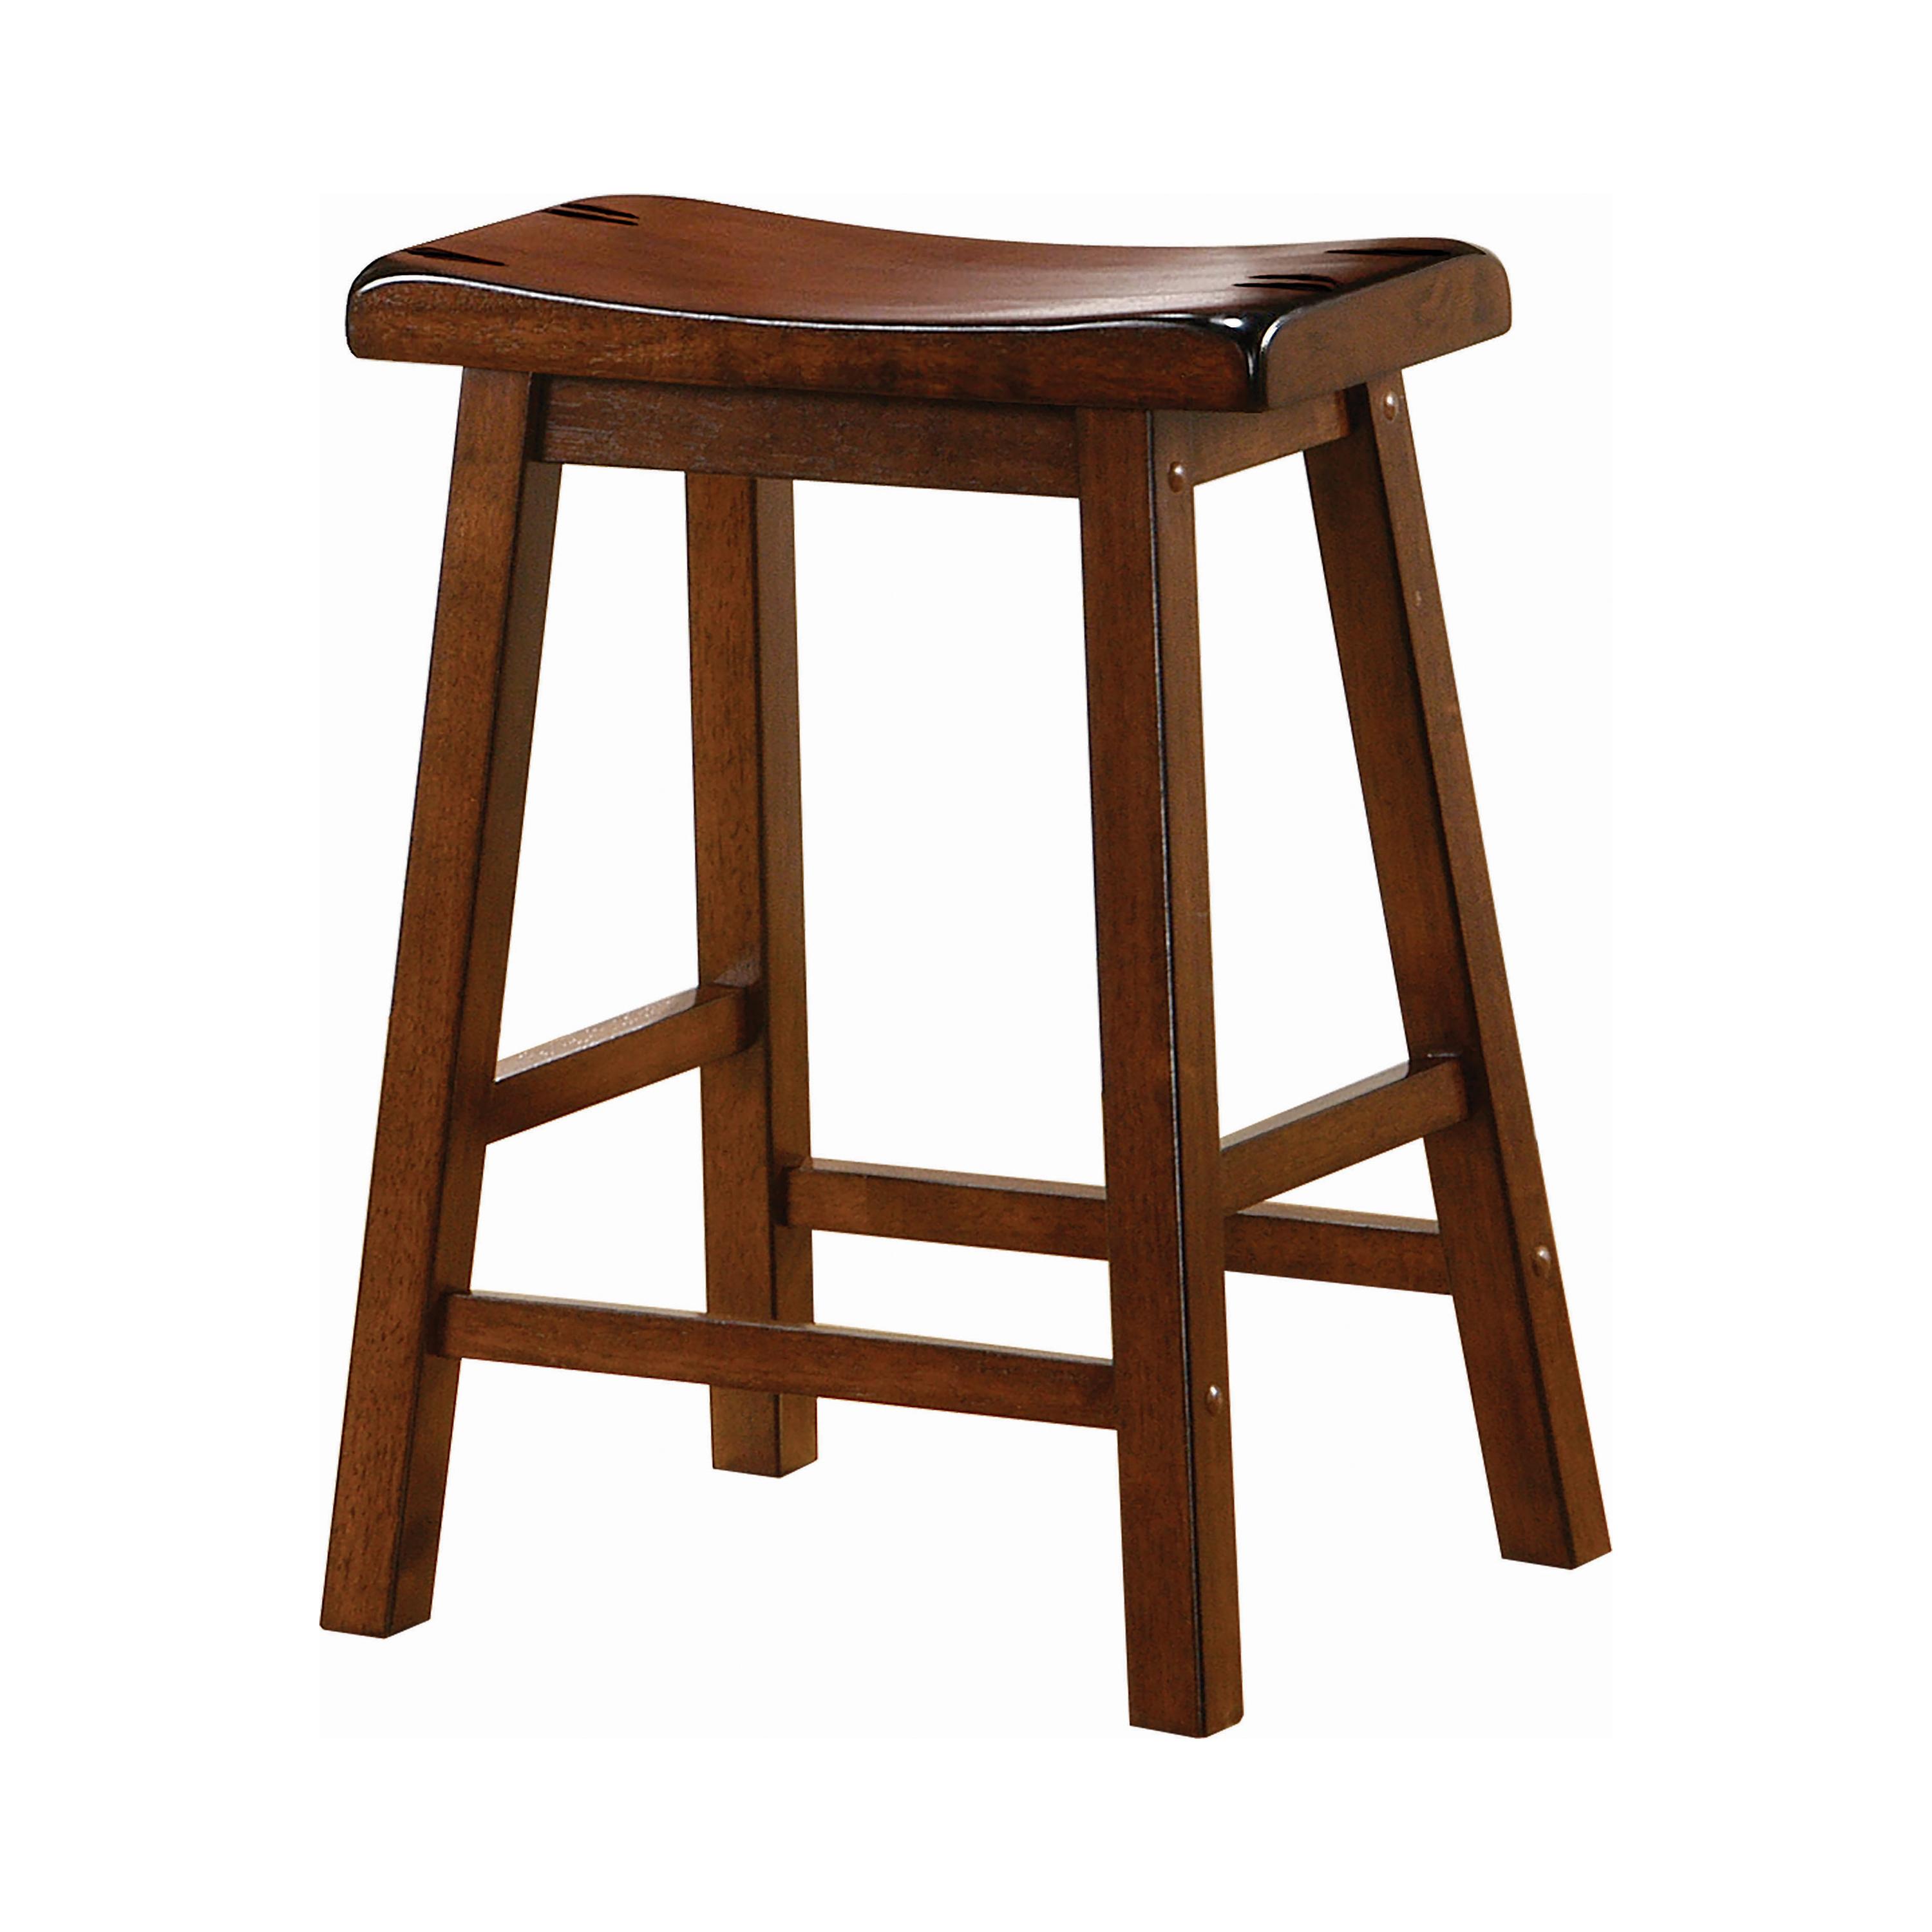 Transitional Counter Height Stool Set 180069 180069 in Chestnut 